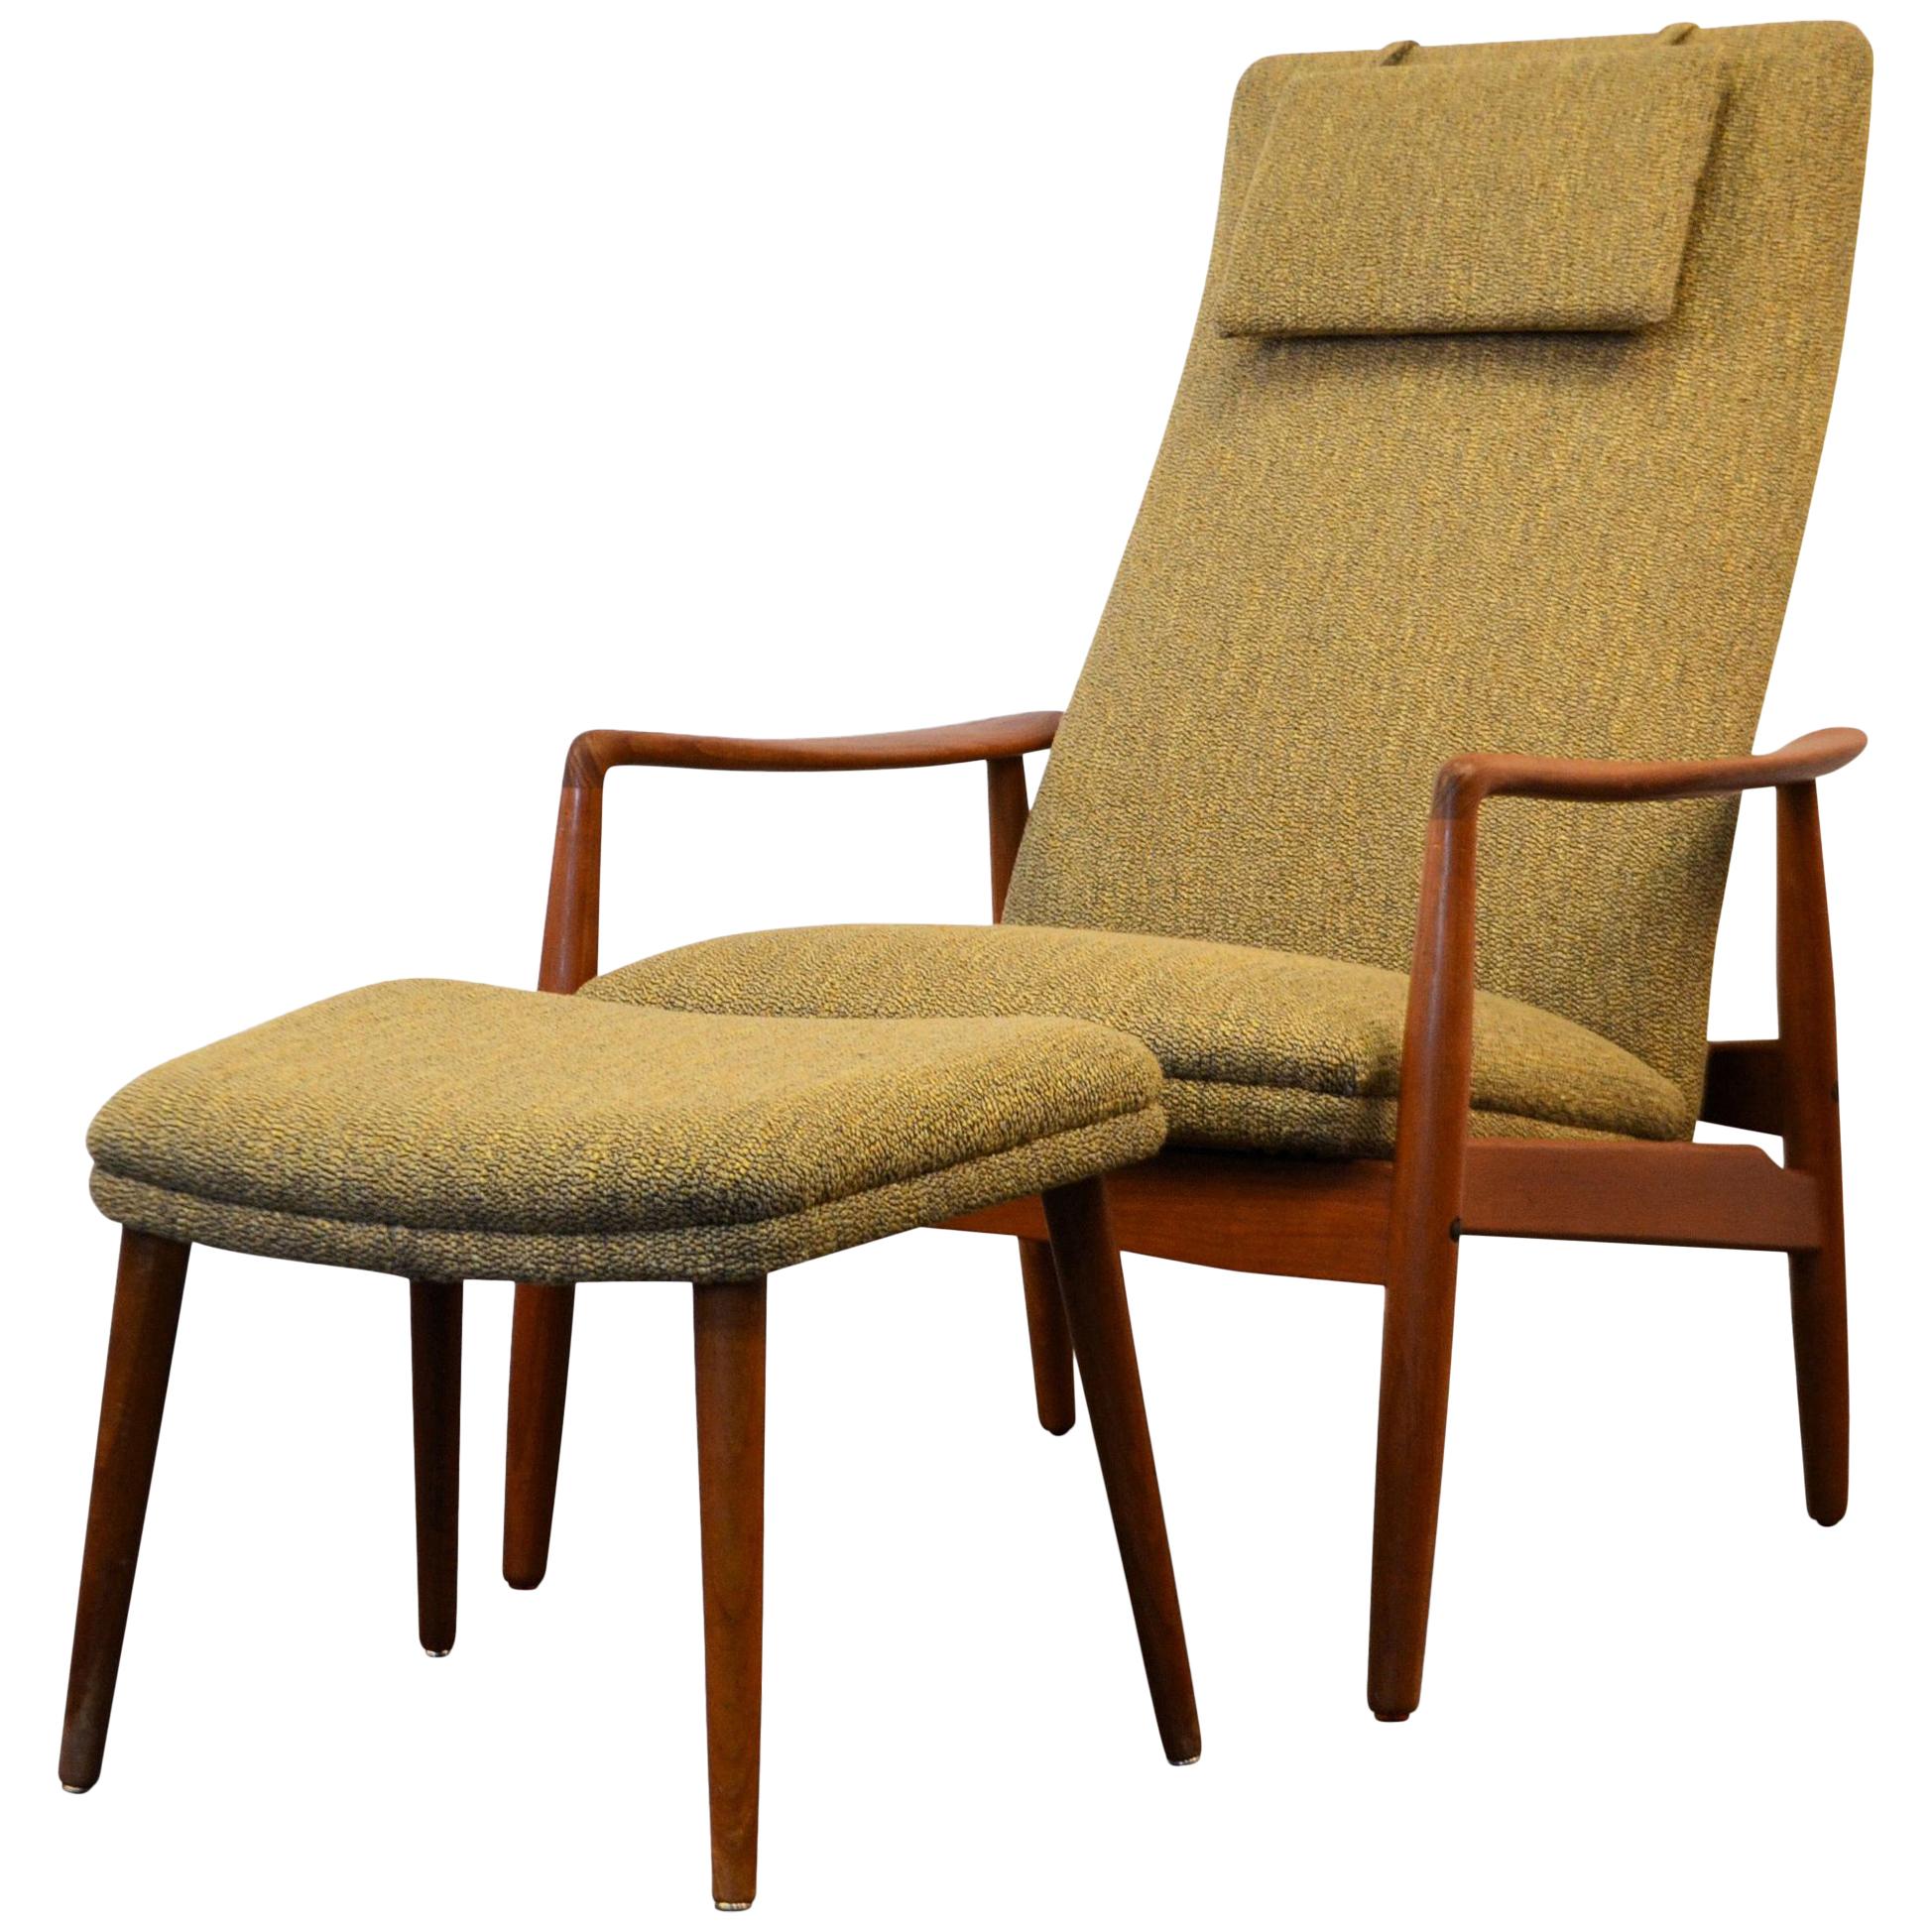 Søren Ladefoged Teak Lounge Chair and Matching Ottoman